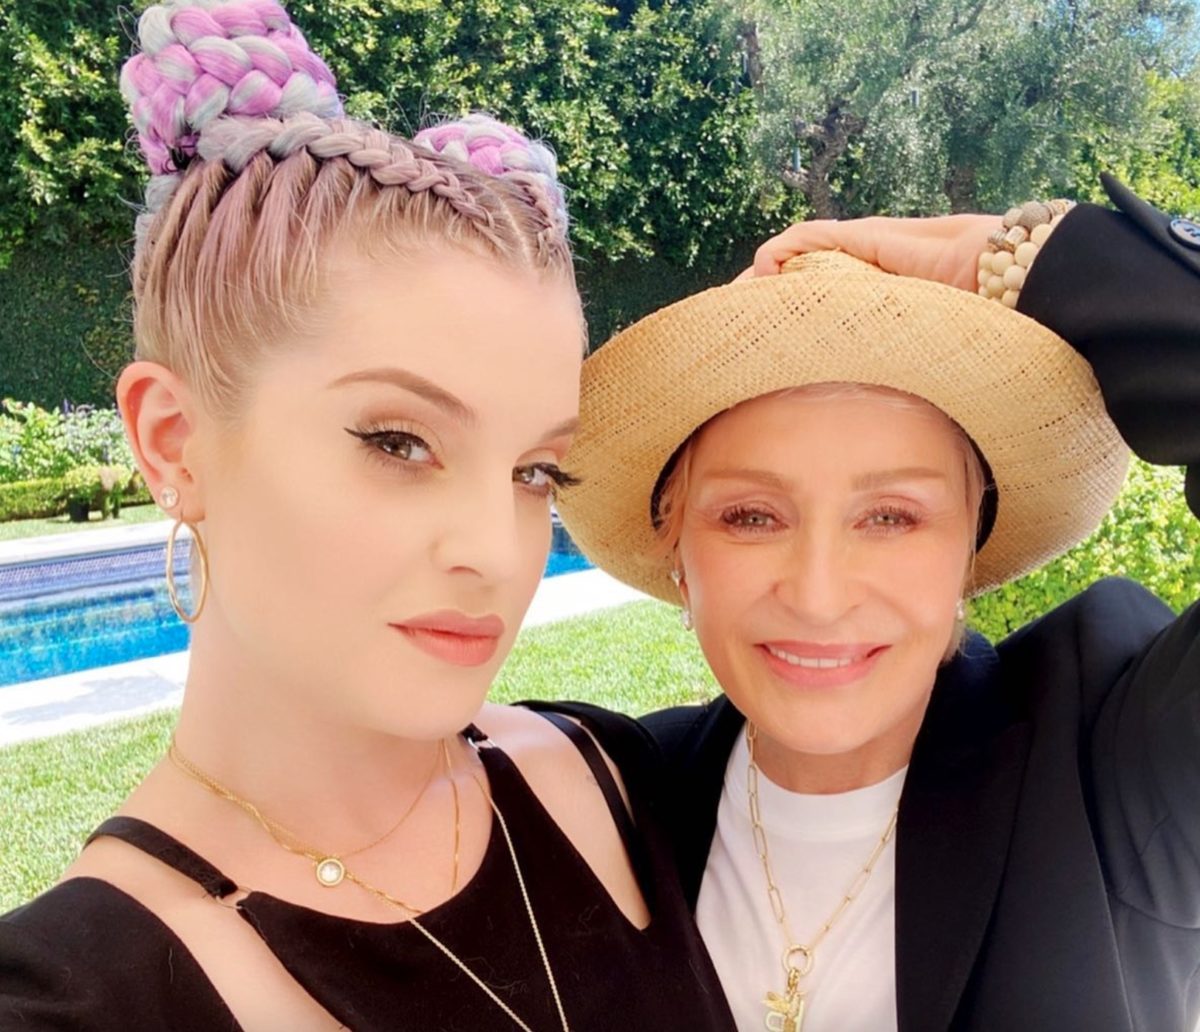 Sharon Osbourne Just Dropped a Major Bombshell About Kelly Osbourne's Pregnancy and Kelly Is Not Happy